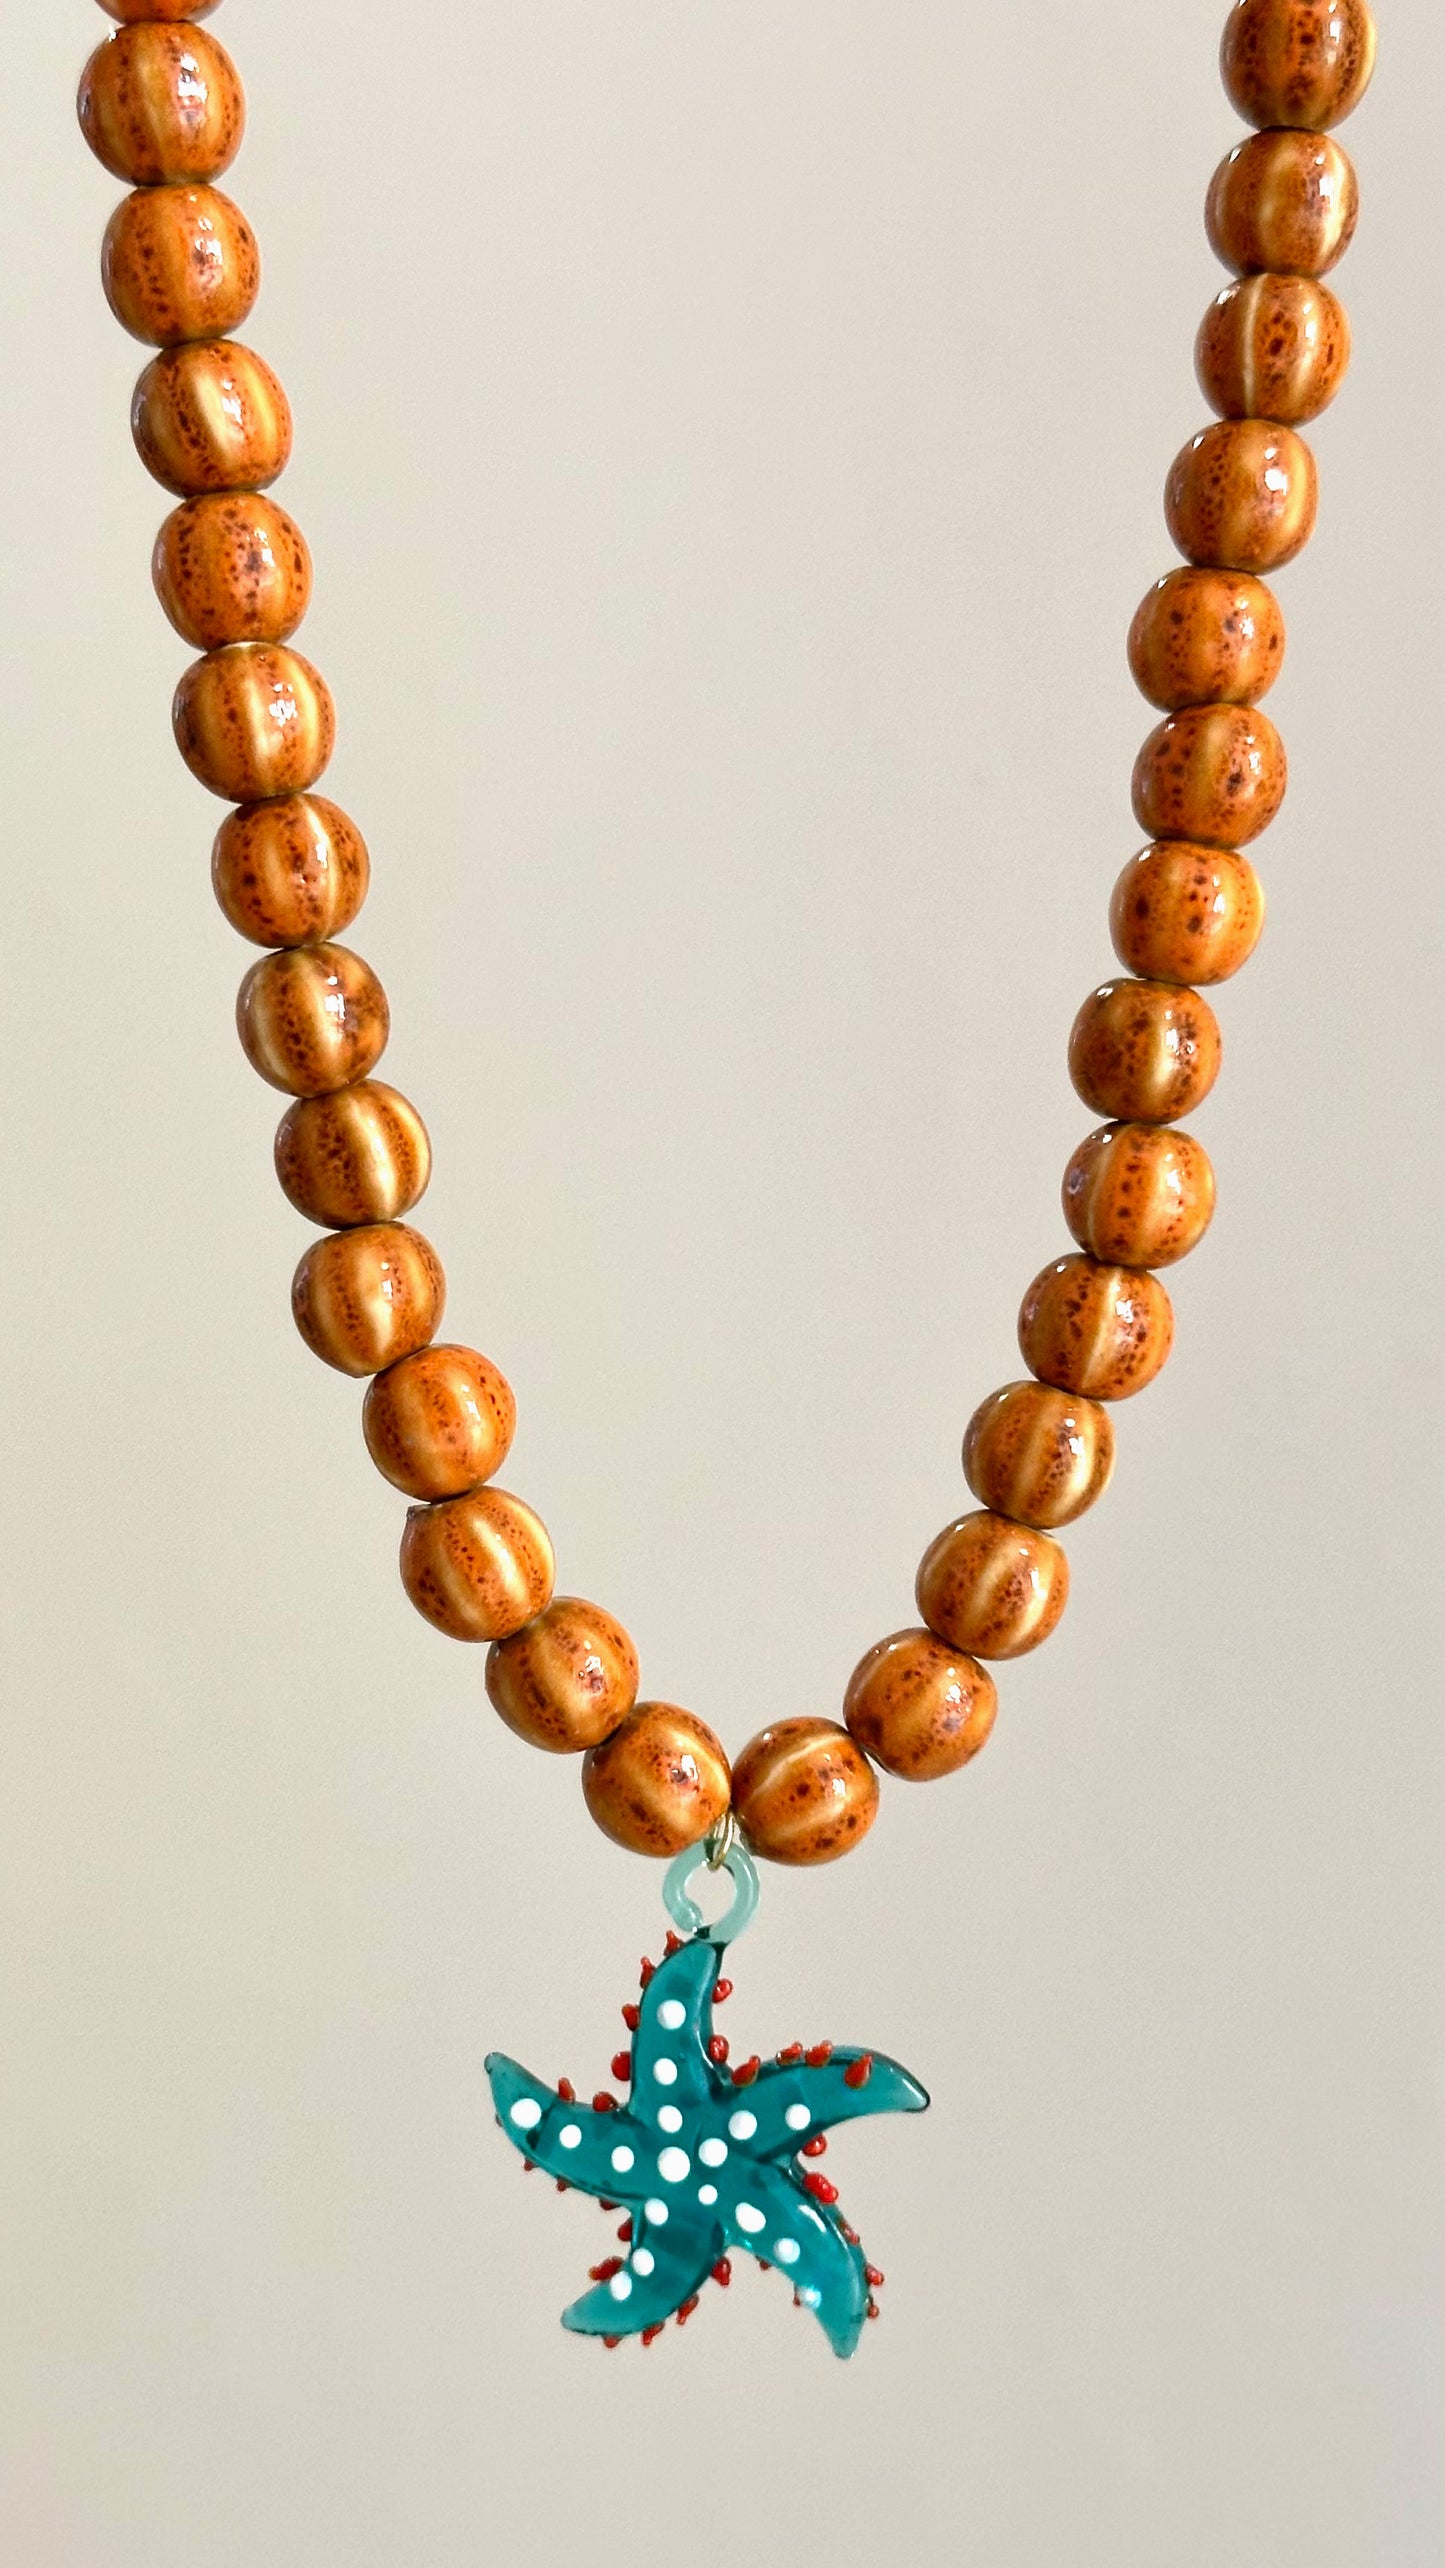 Orange and blue patrician necklace